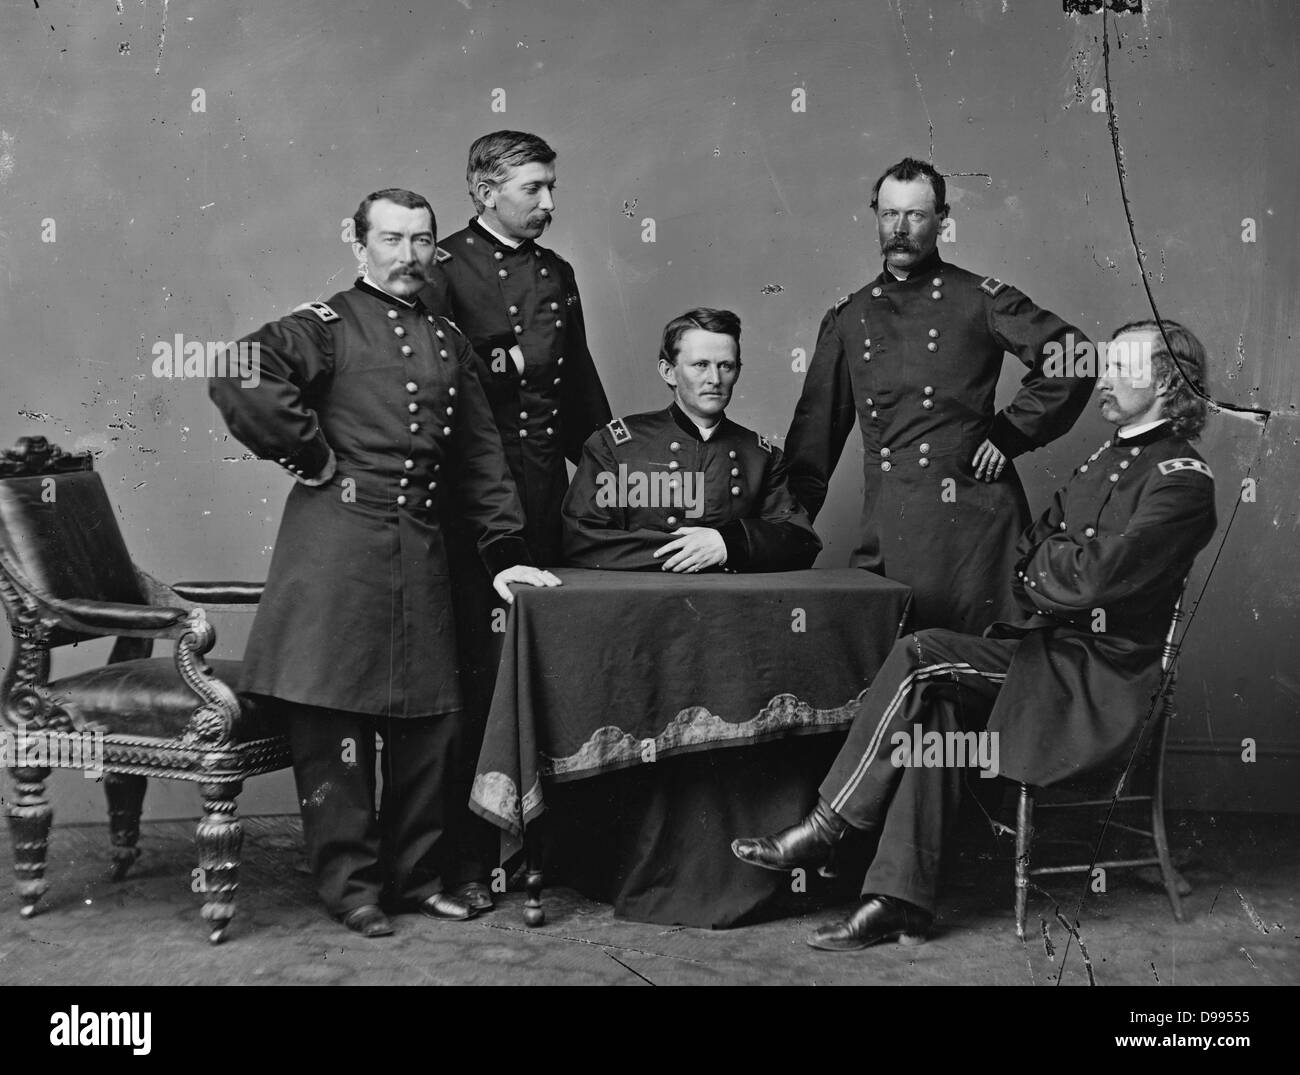 General Philip Sheridan (1831-1888), standing right, and his Staff officers during the American Civil War 1860-1865. American Army officer and Union (Northern) general. Stock Photo